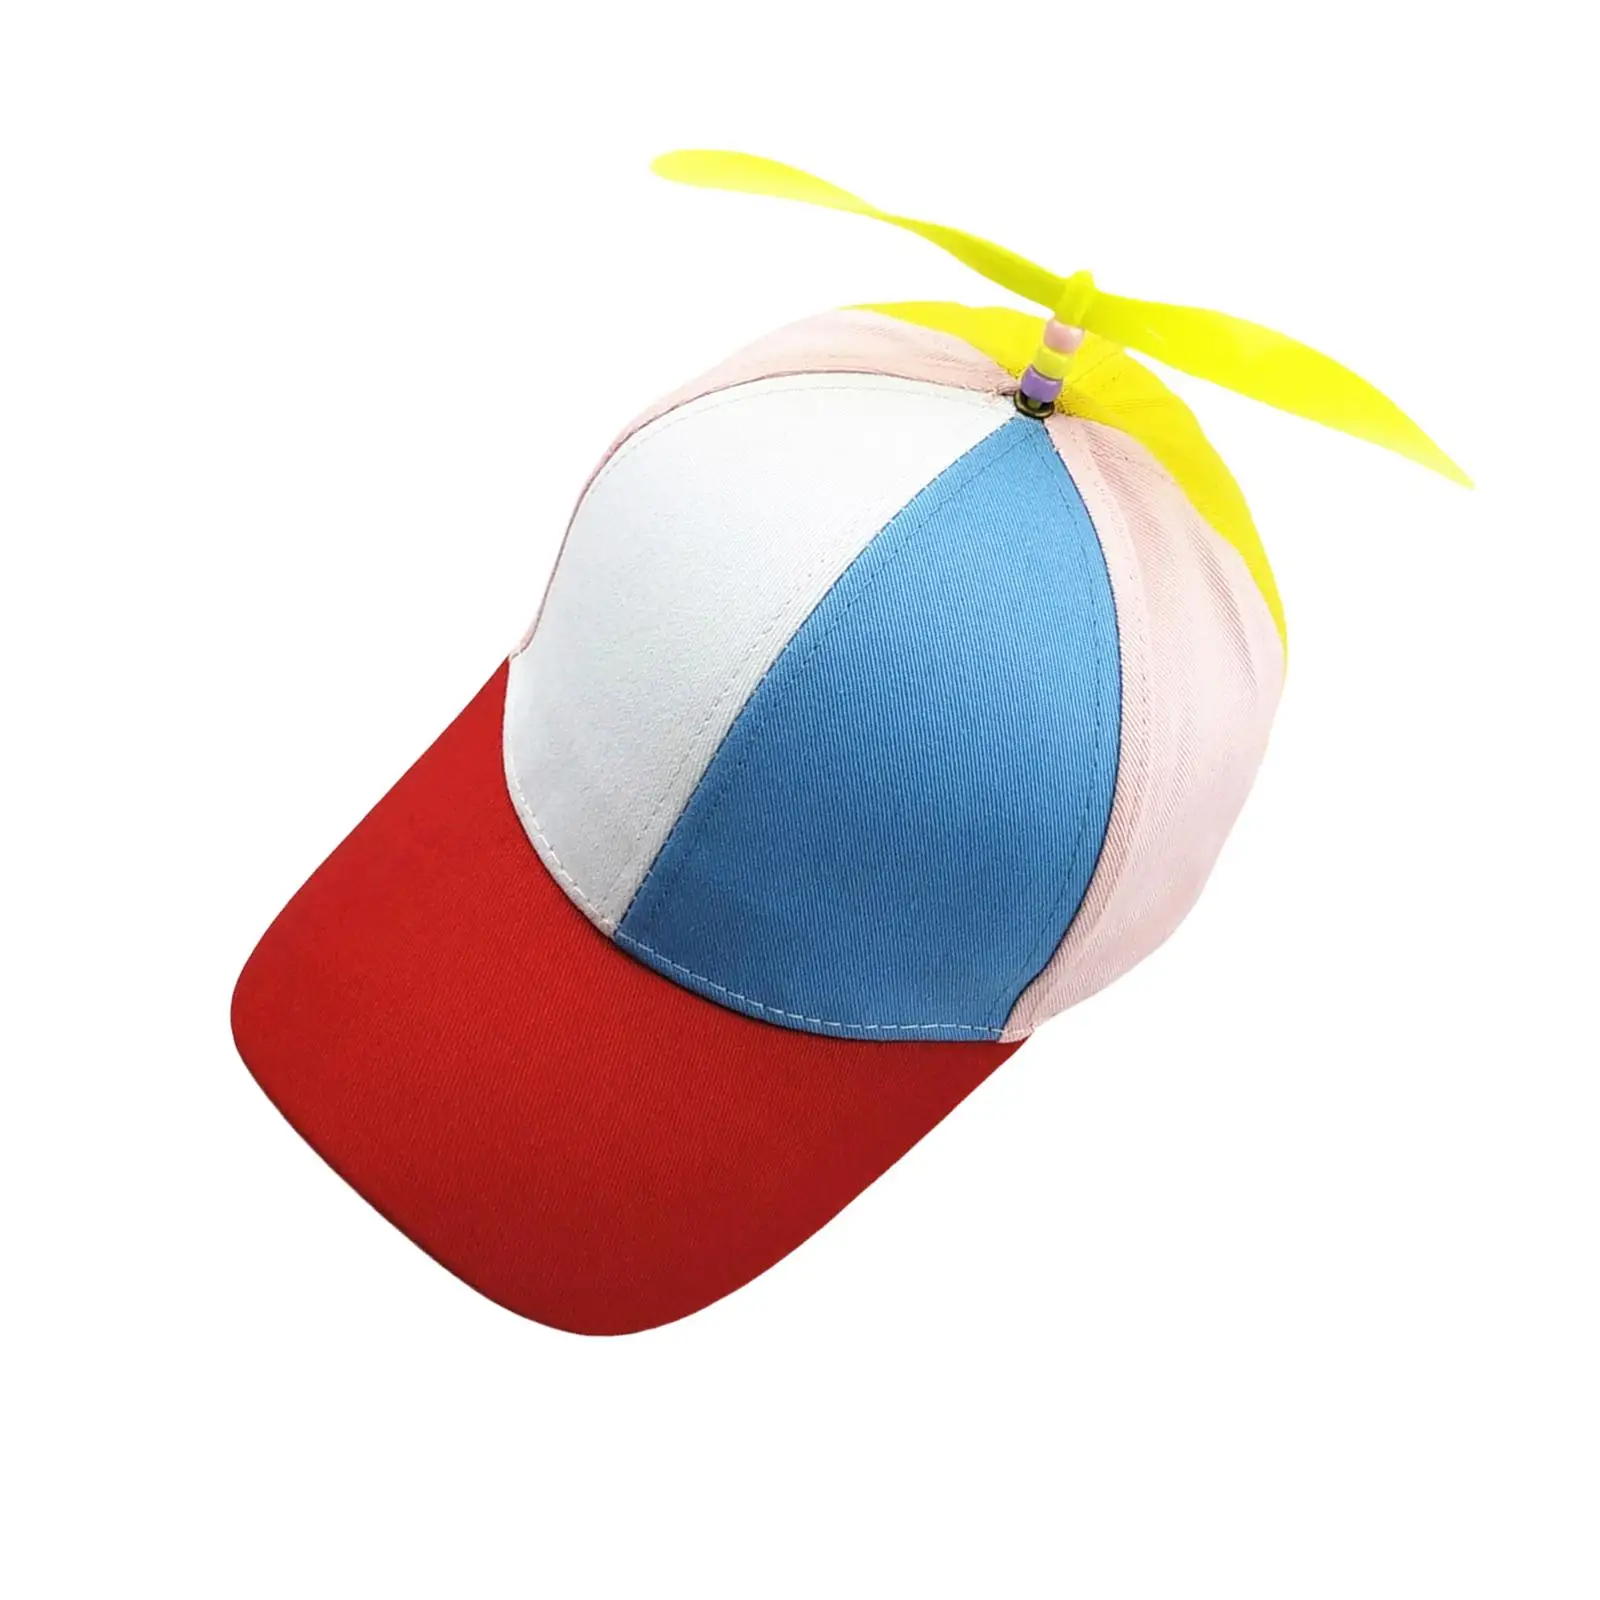 Propeller Hat Rainbow Dragonfly Sun Hat Multicolor Breathable Novelty Baseball Cap for Casual Fancy Dress Outdoor Costume Boys